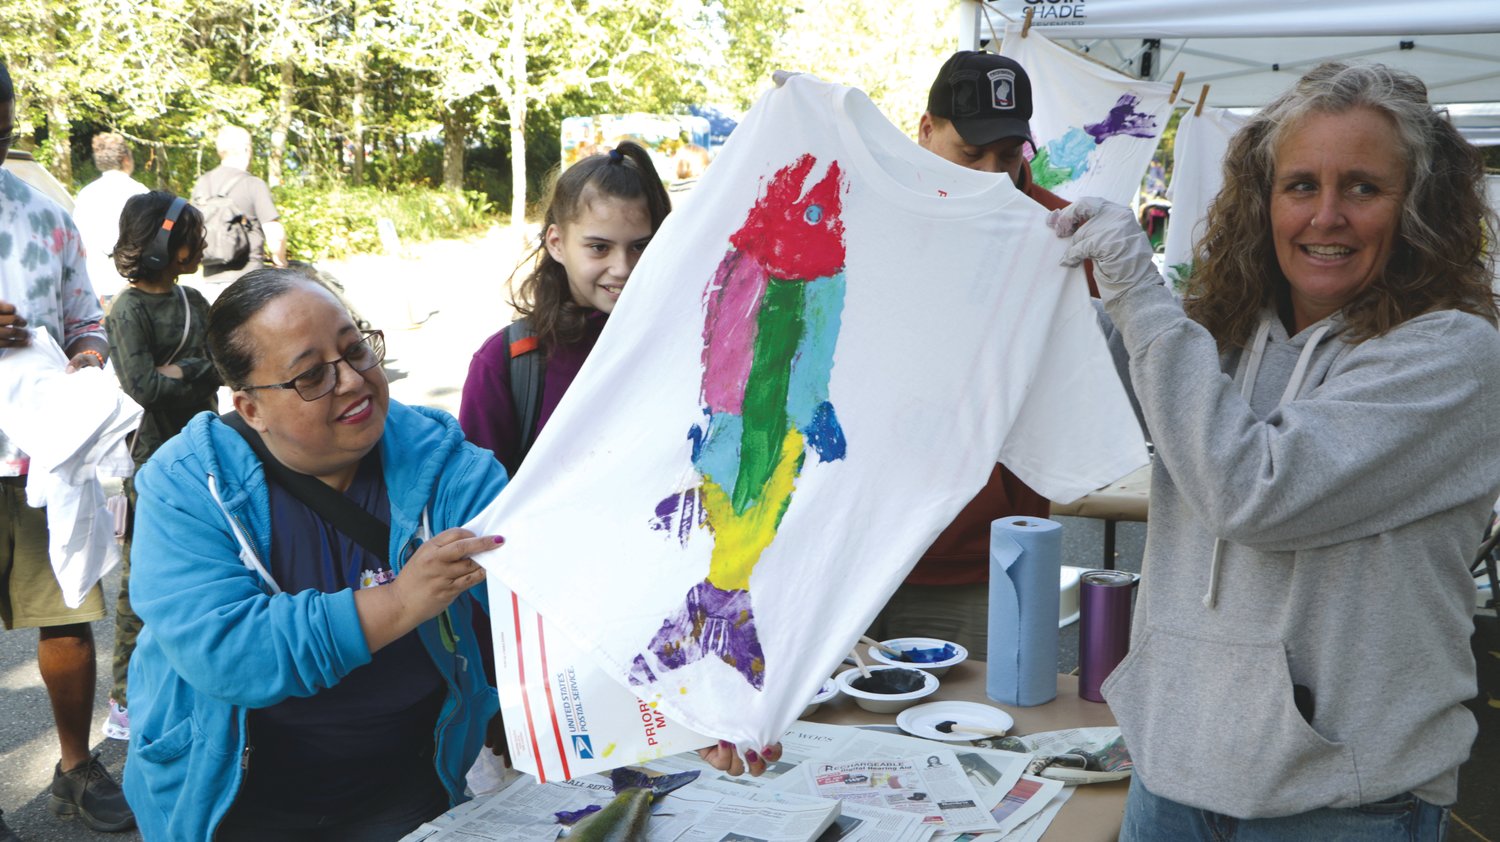 Attendees of the Nisqually Watershed Festival hold up a custom salmon-themed shirt on Saturday, Sept. 24.